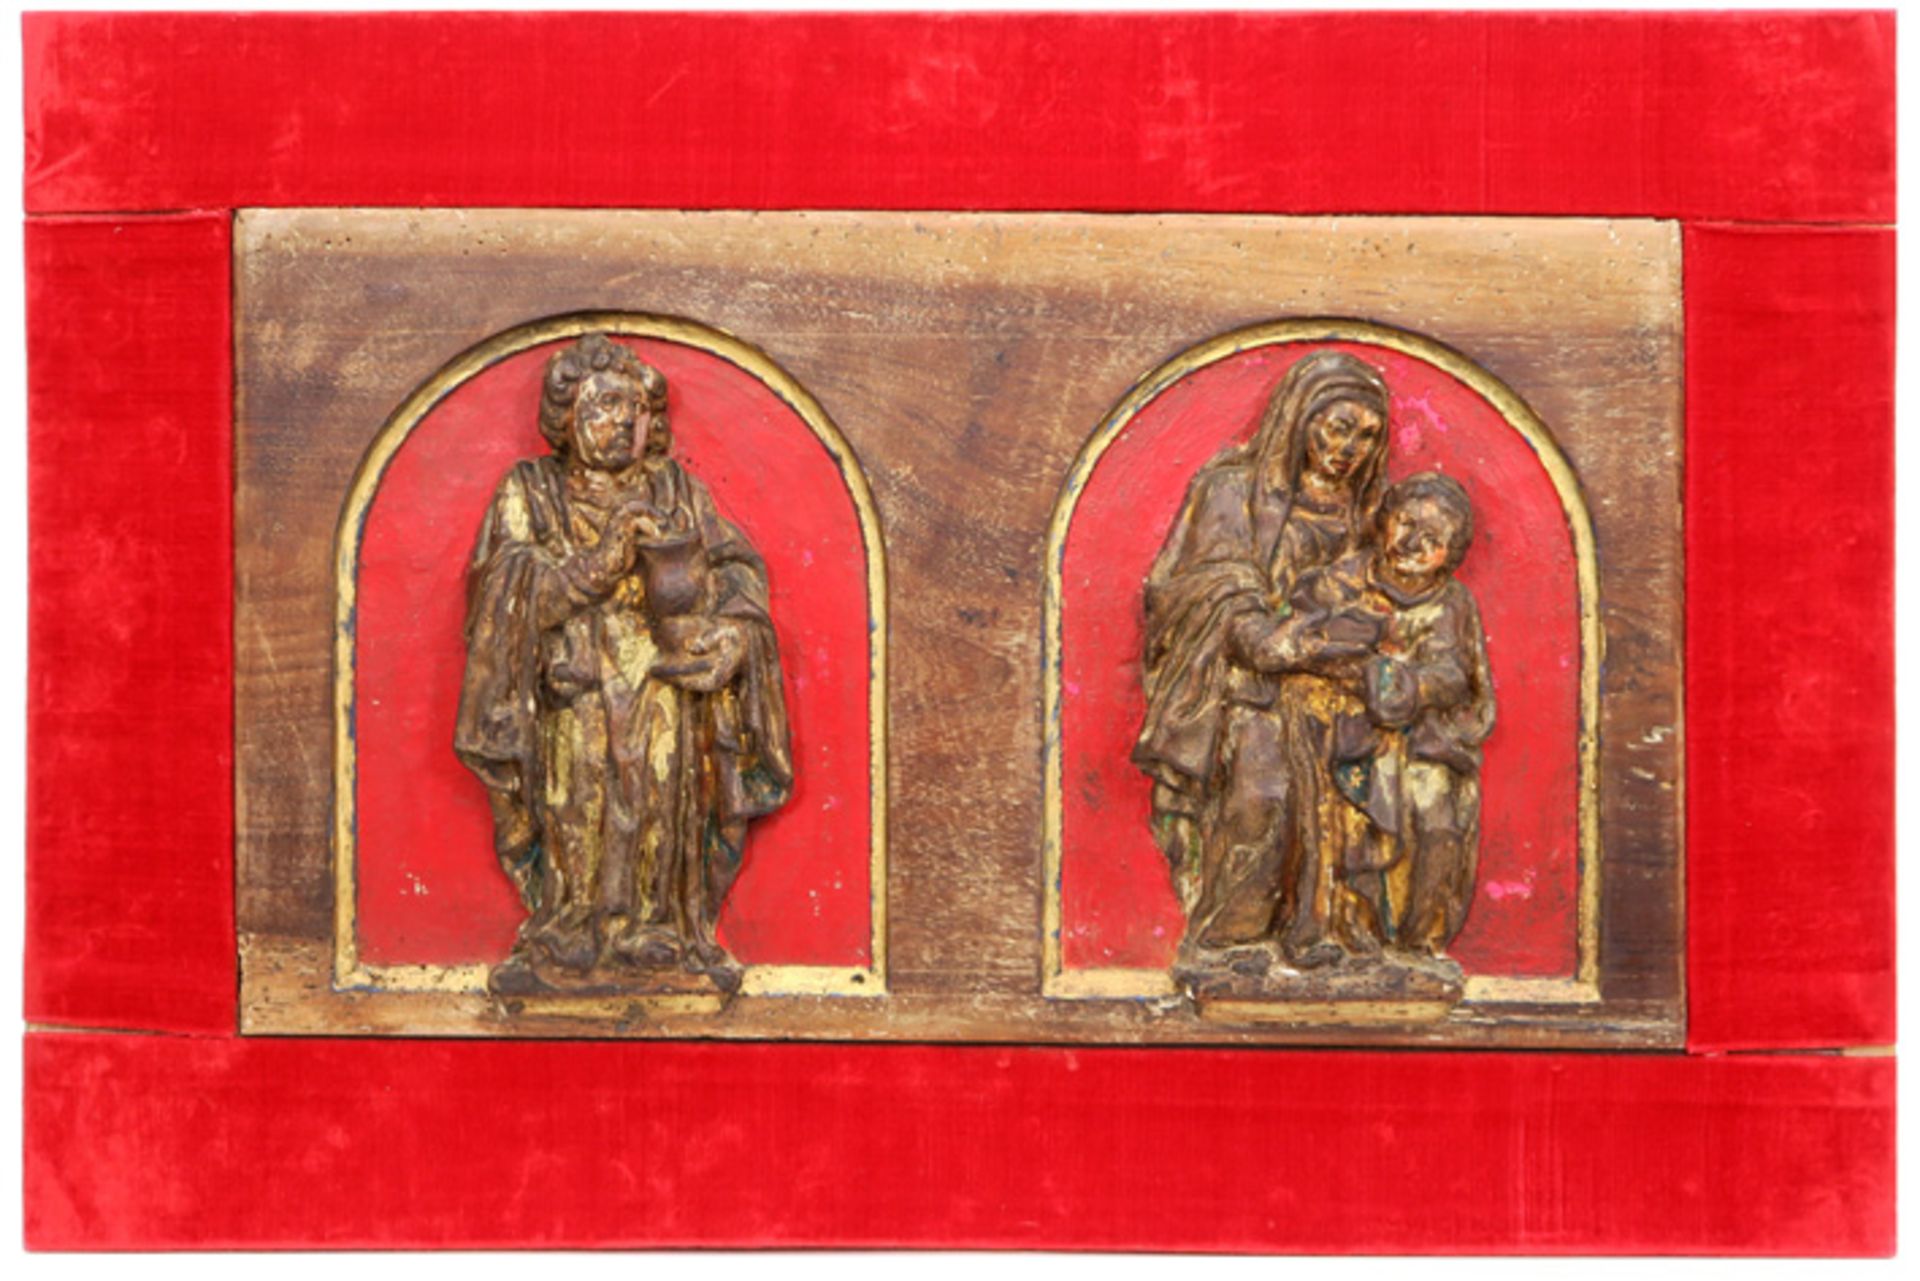 16th/17th Cent. European oak high relief sculpture with remains of the original polychromy || EUROPA